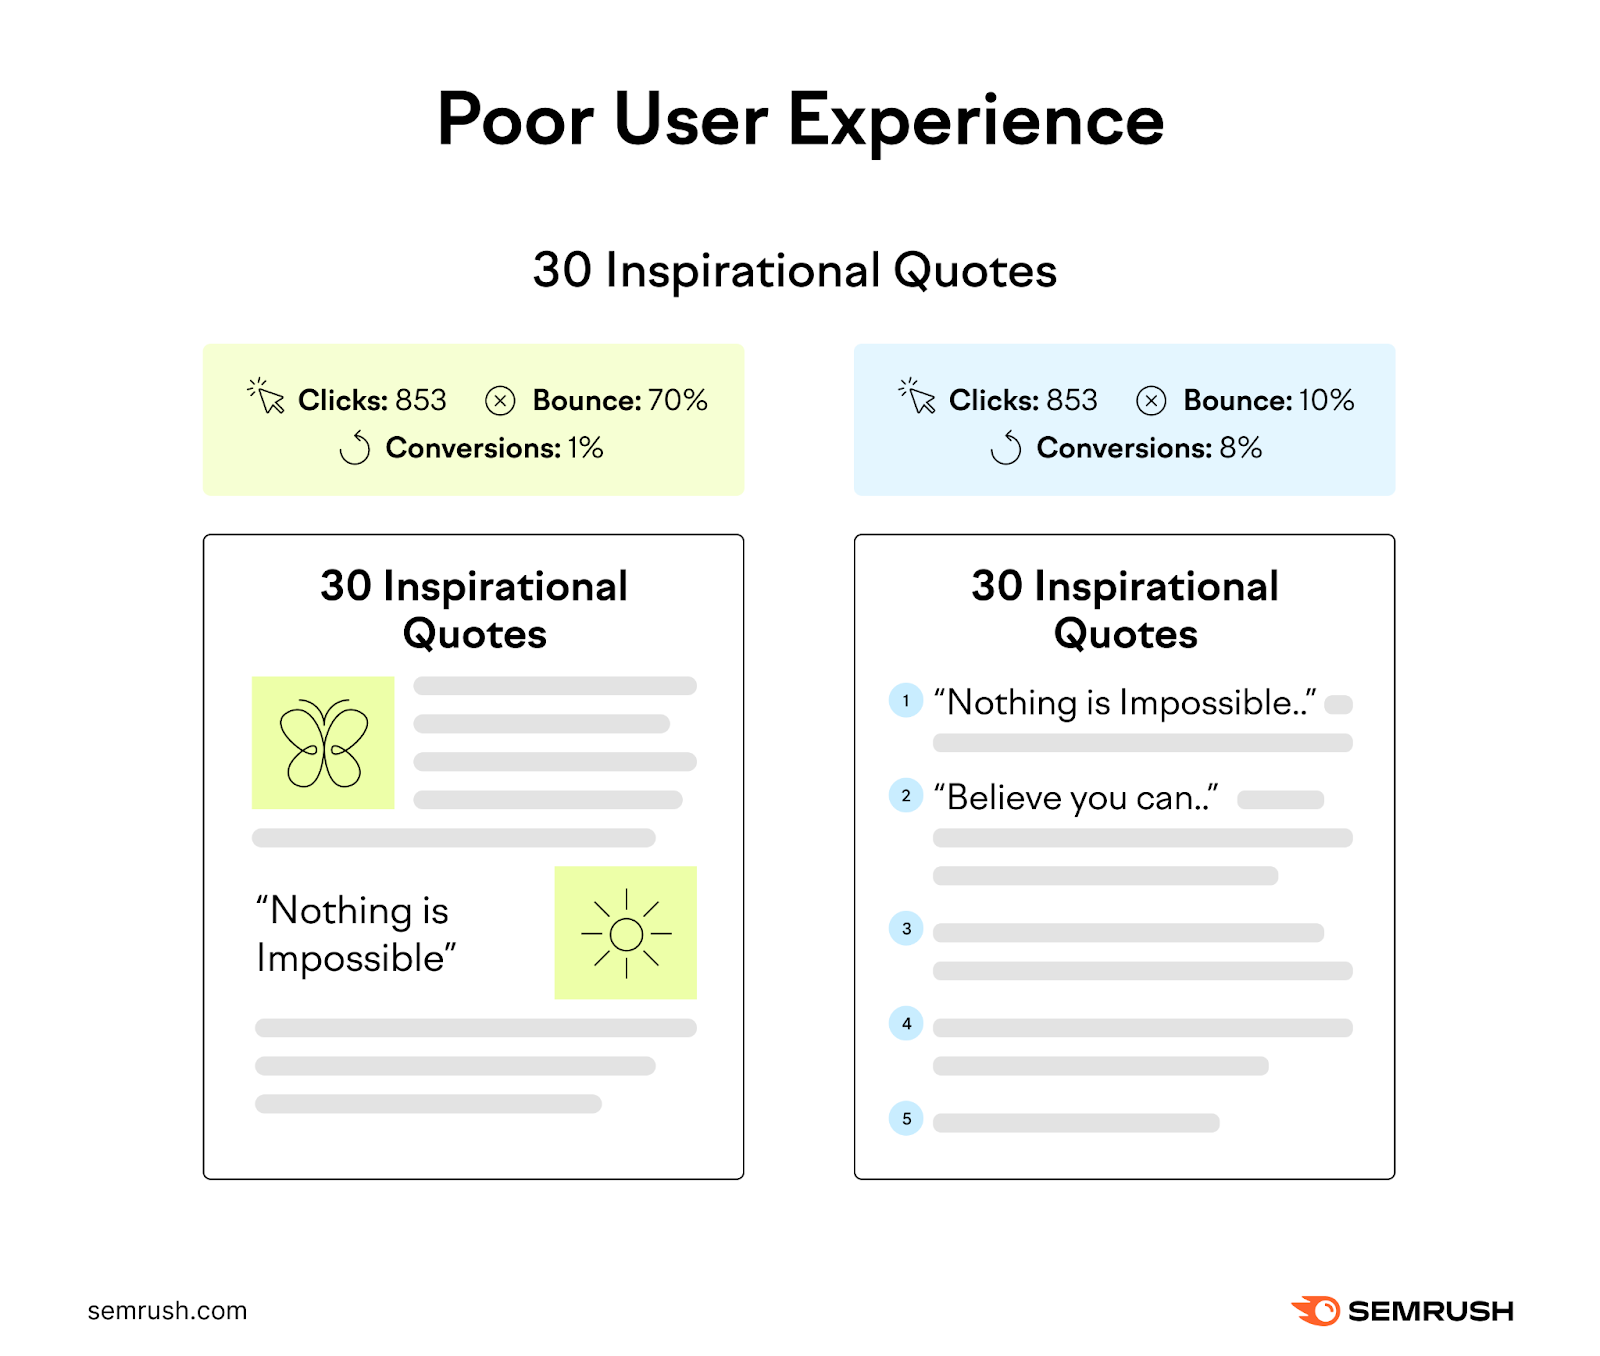 ab testing user experience and engagement